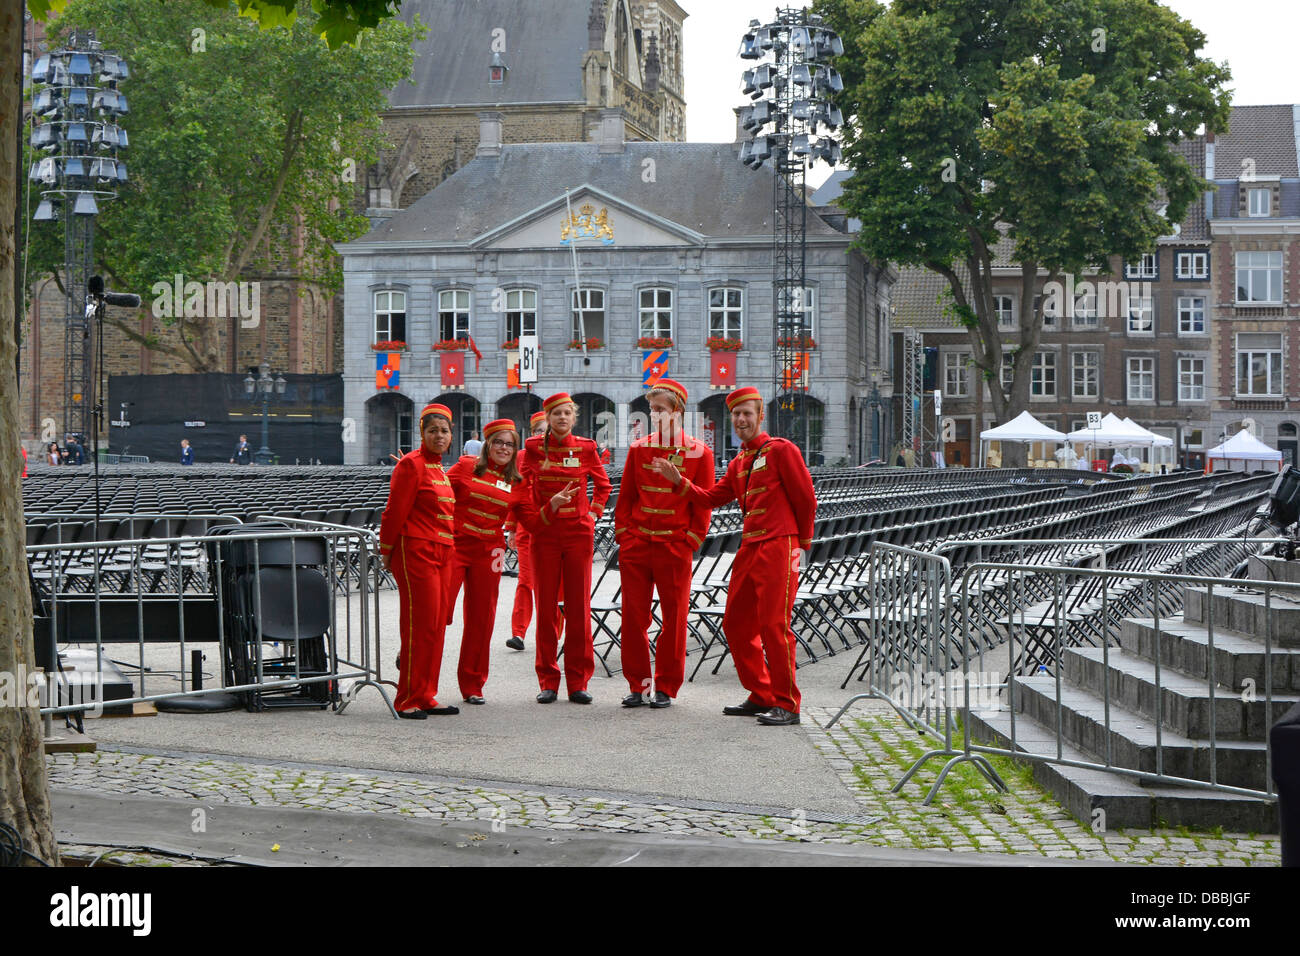 Maastricht City Vrijthof Square André Rieu summer music concert event ushers dressed red bellboy type uniforms to assist people to seating places EU Stock Photo